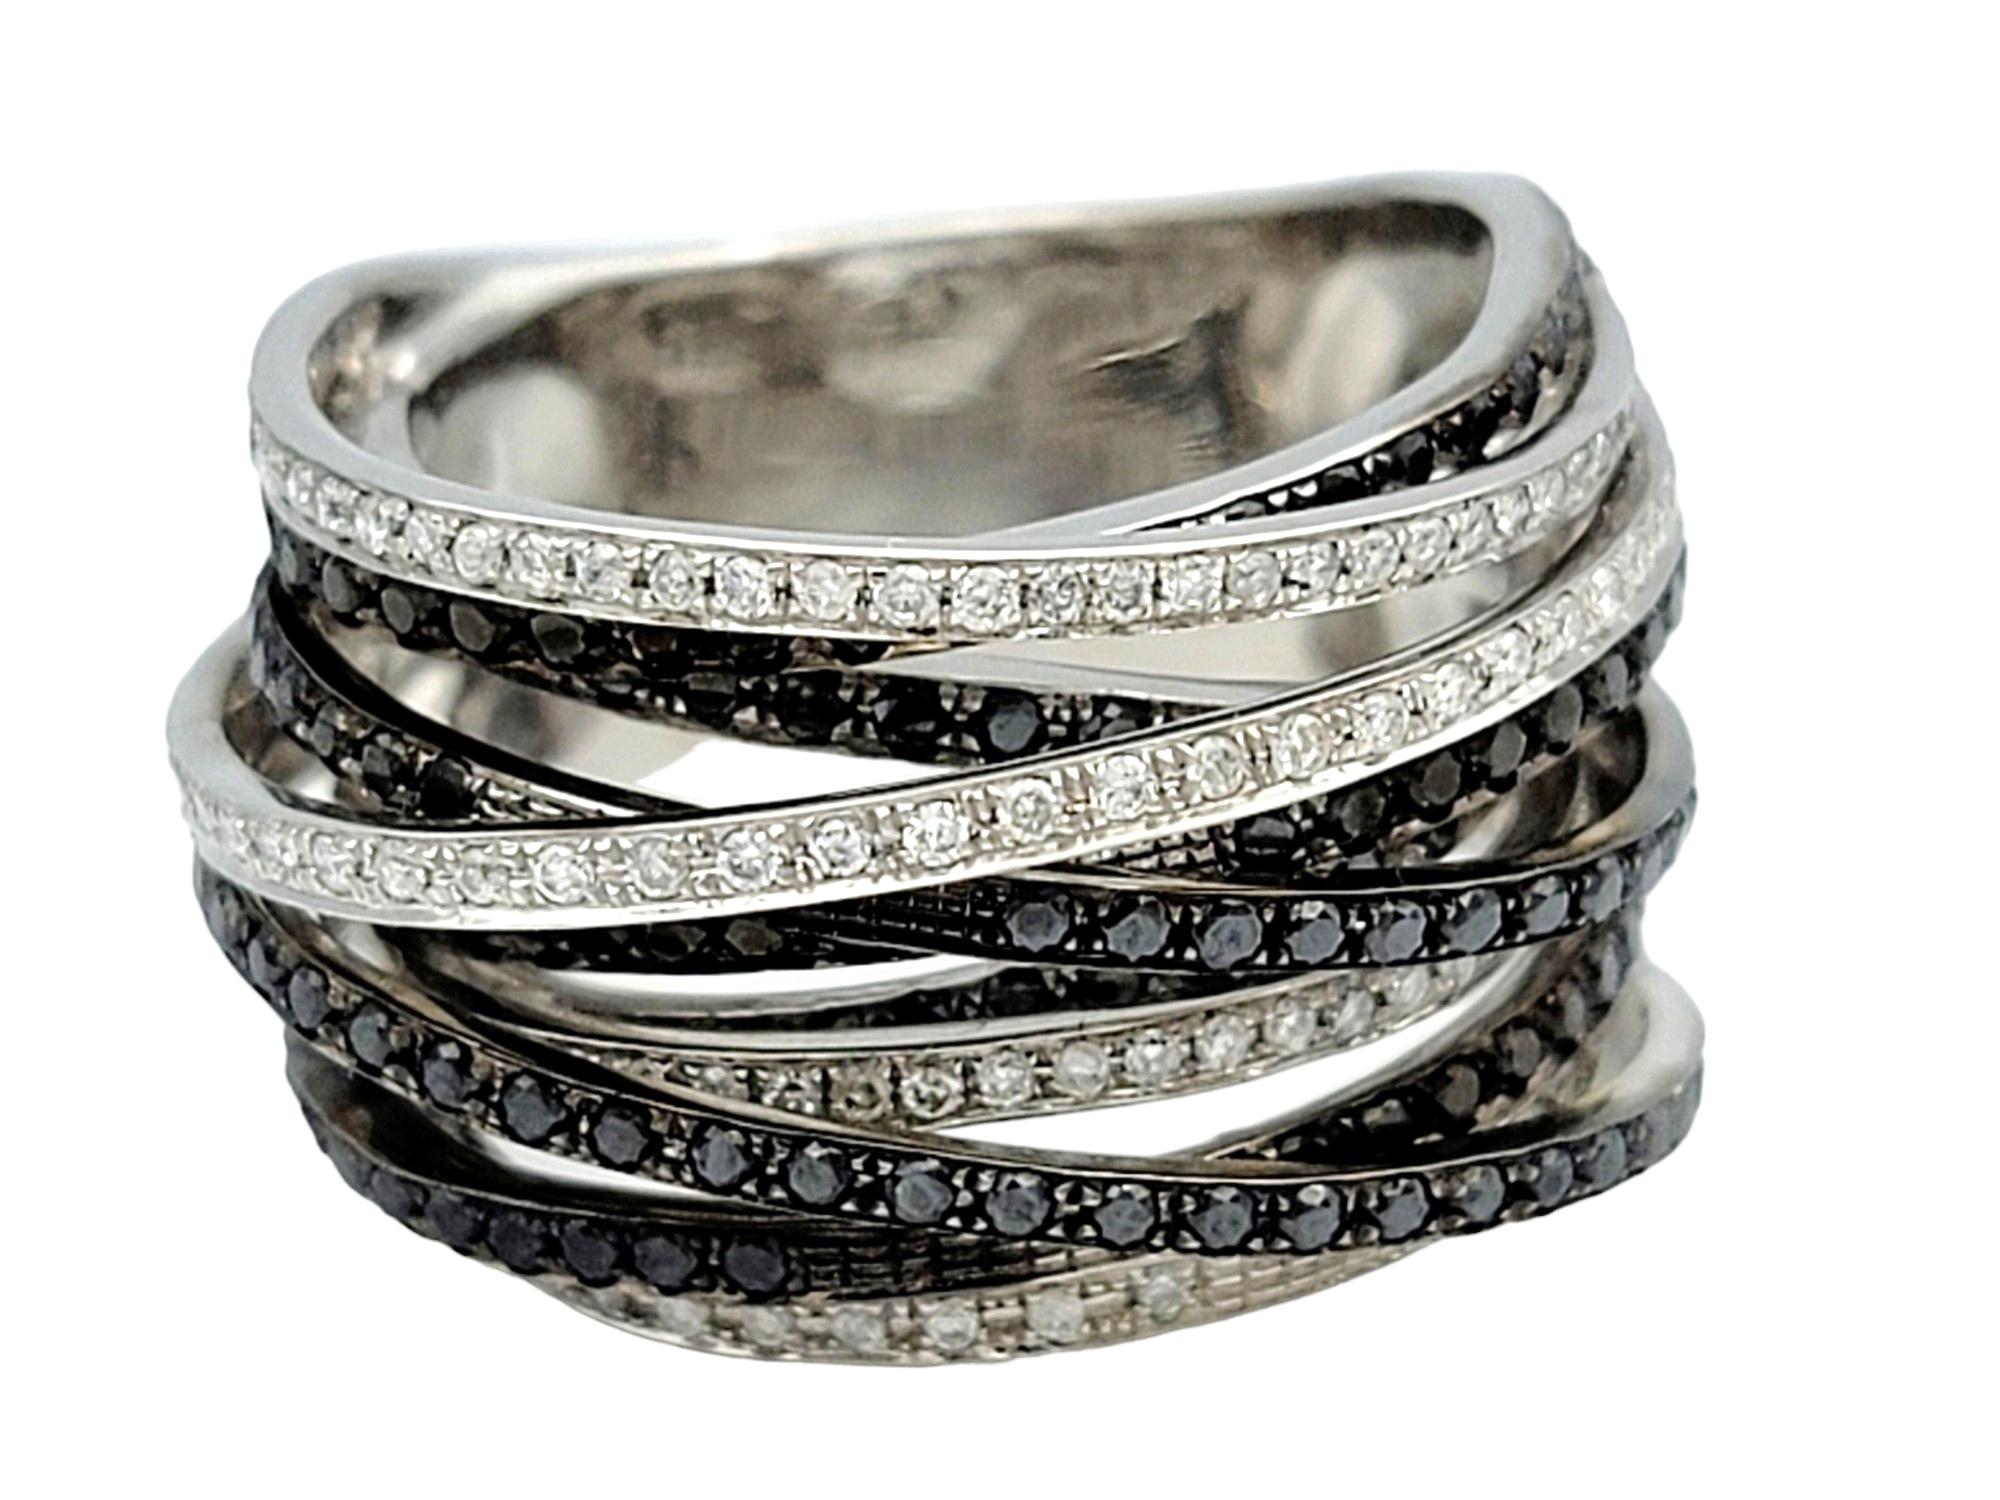 Ring Size: 7.5

Crafted from lustrous 14 karat white gold, this captivating band ring boasts a multi-row design adorned with a stunning array of black and white diamonds. The rows are meticulously layered over one another, creating a sense of depth